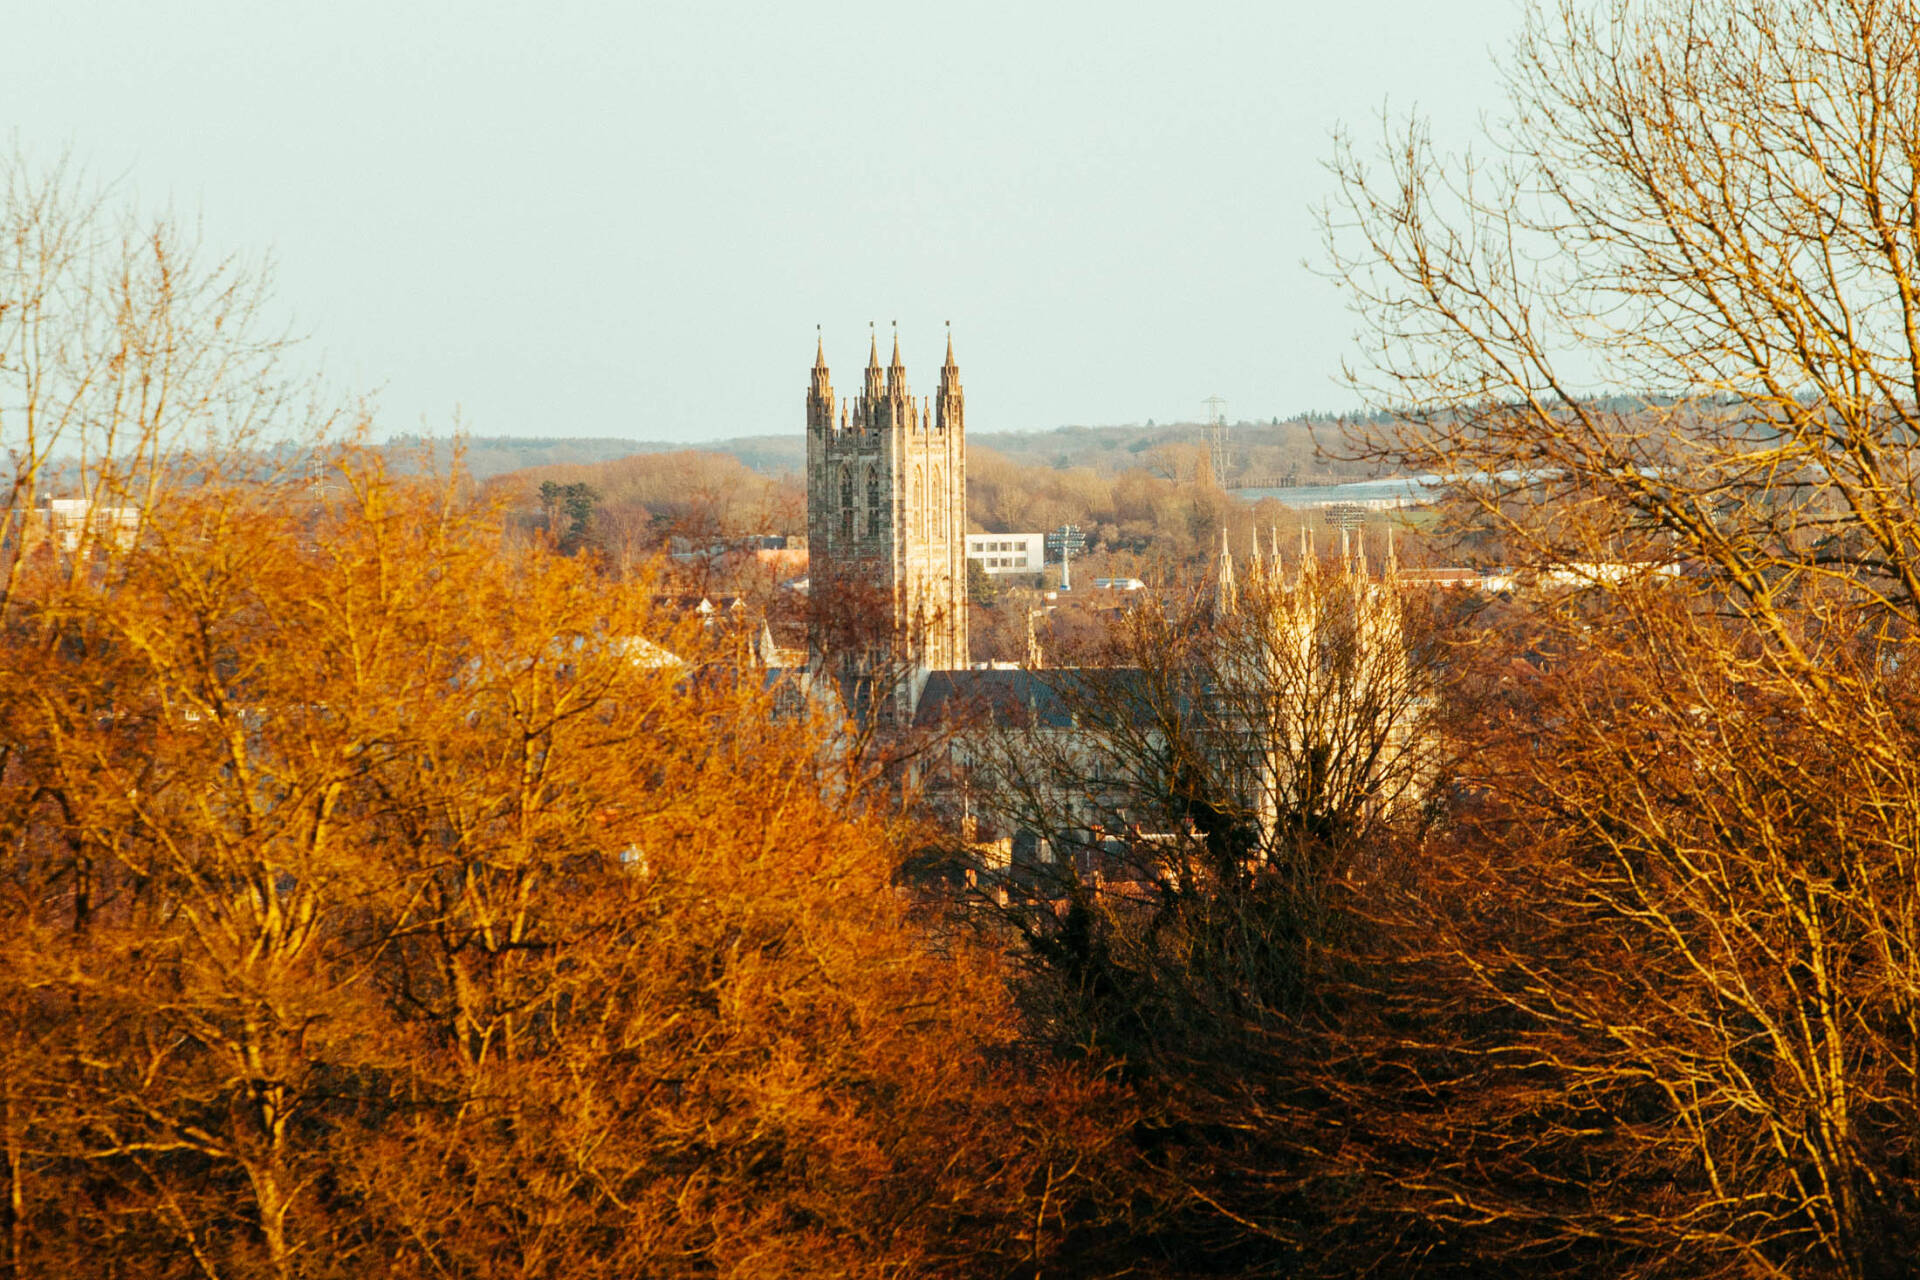 The Canterbury Cathedral surrounded by treesin the background and foreground.